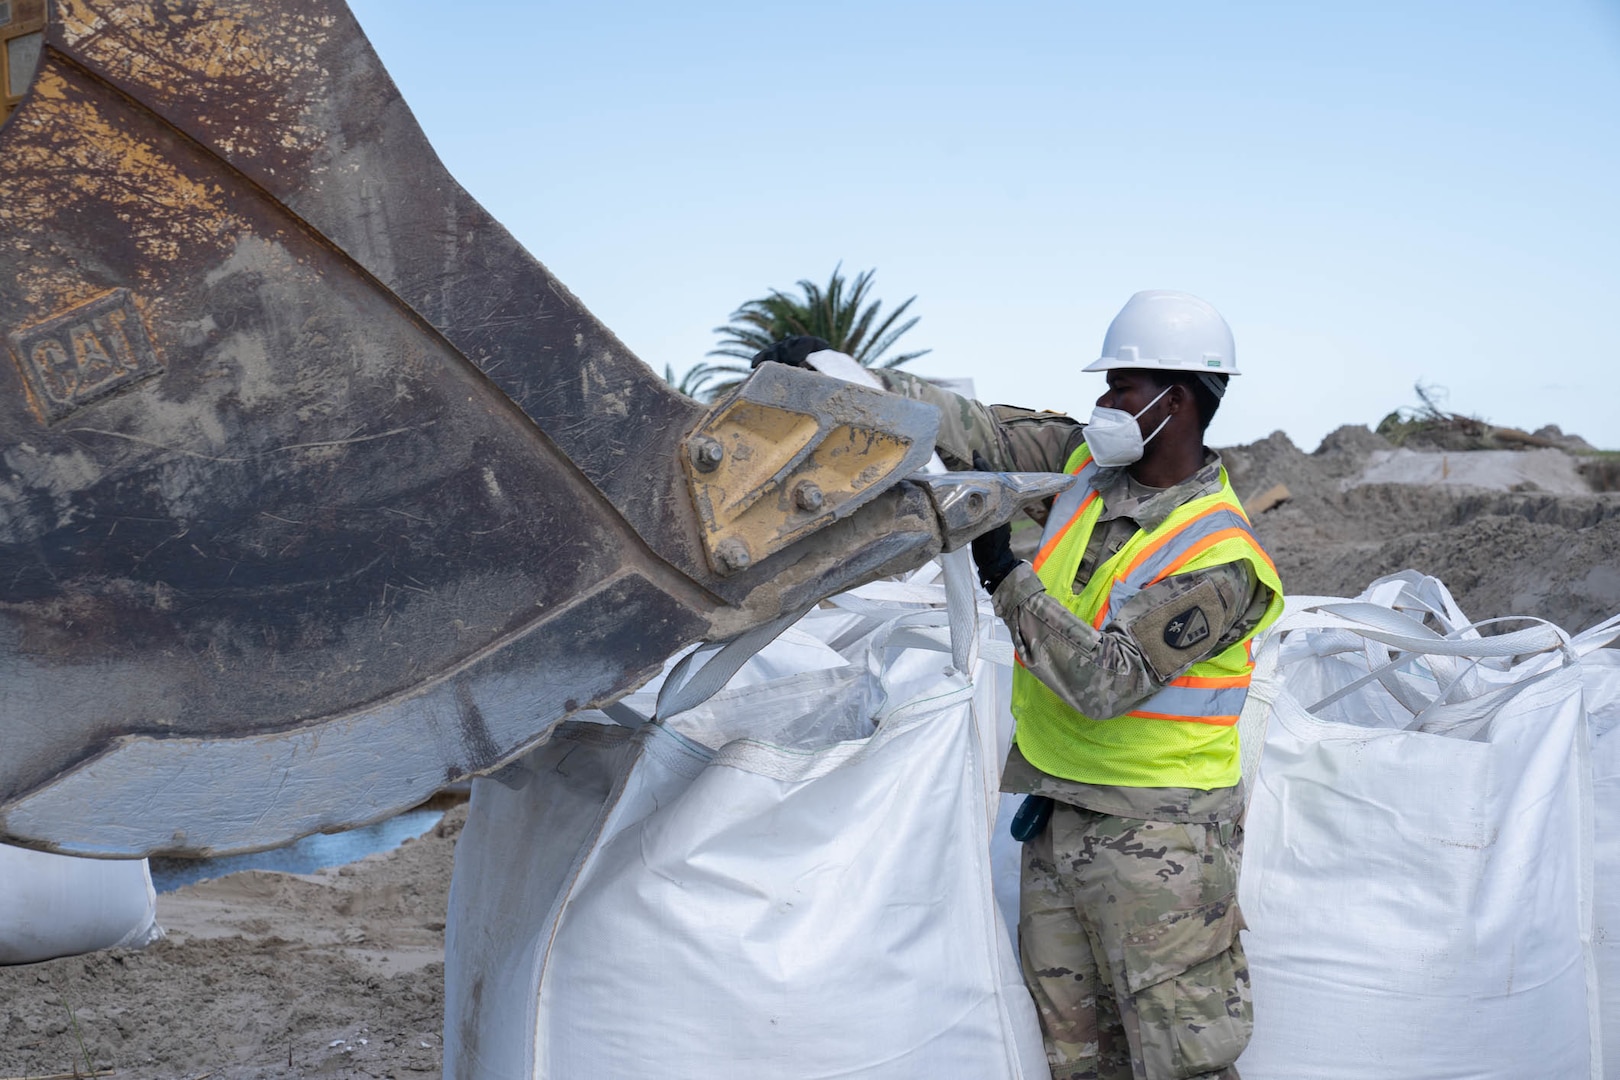 A Louisiana National Guardsman assigned to the 225th Engineer Brigade hooks a 3-by-3 foot sack filled with up to 4,000 pounds of sand to an excavator bucket to temporarily repair levee breaches in Grand Isle, Louisiana, Sept 24, 2021. The 225th has emplaced more than 1,100 sacks of sand along the coastline levees in Grand Isle.